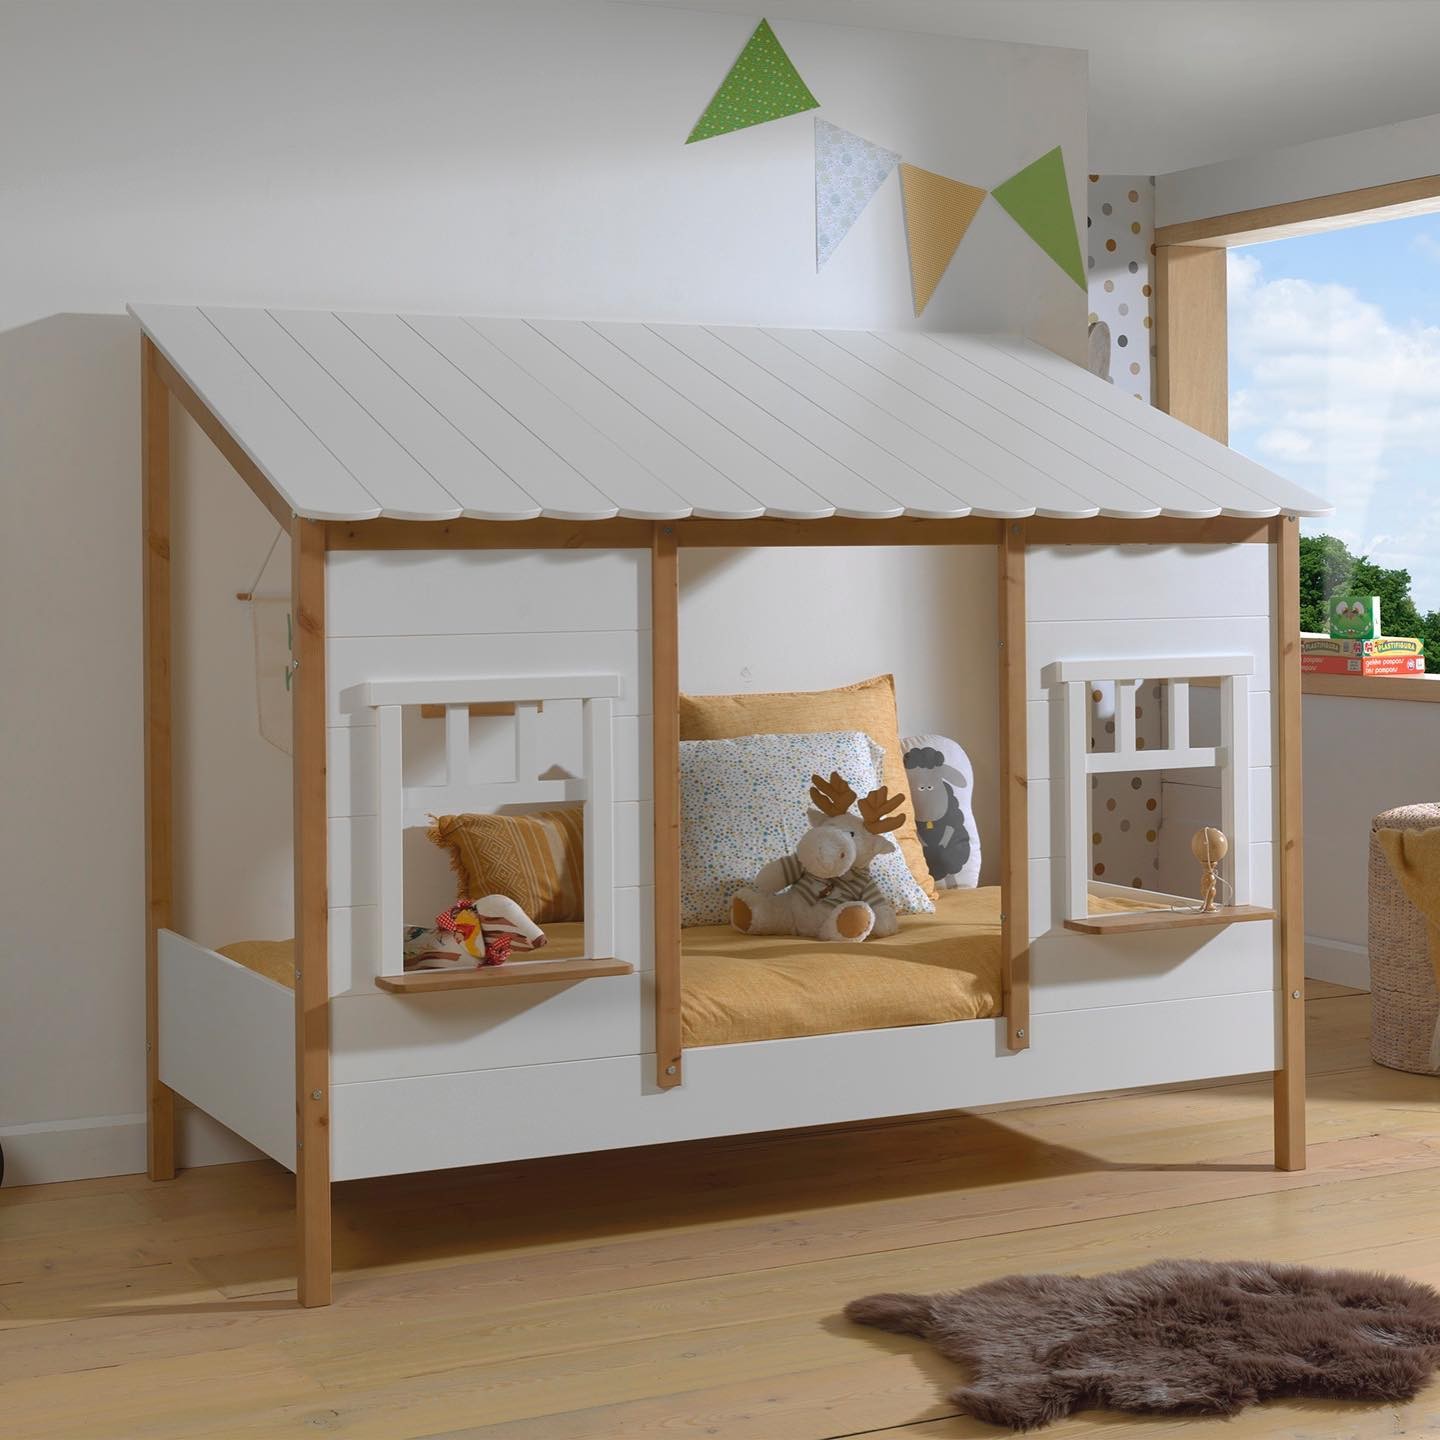 THE HOUSE BED FOR KIDS